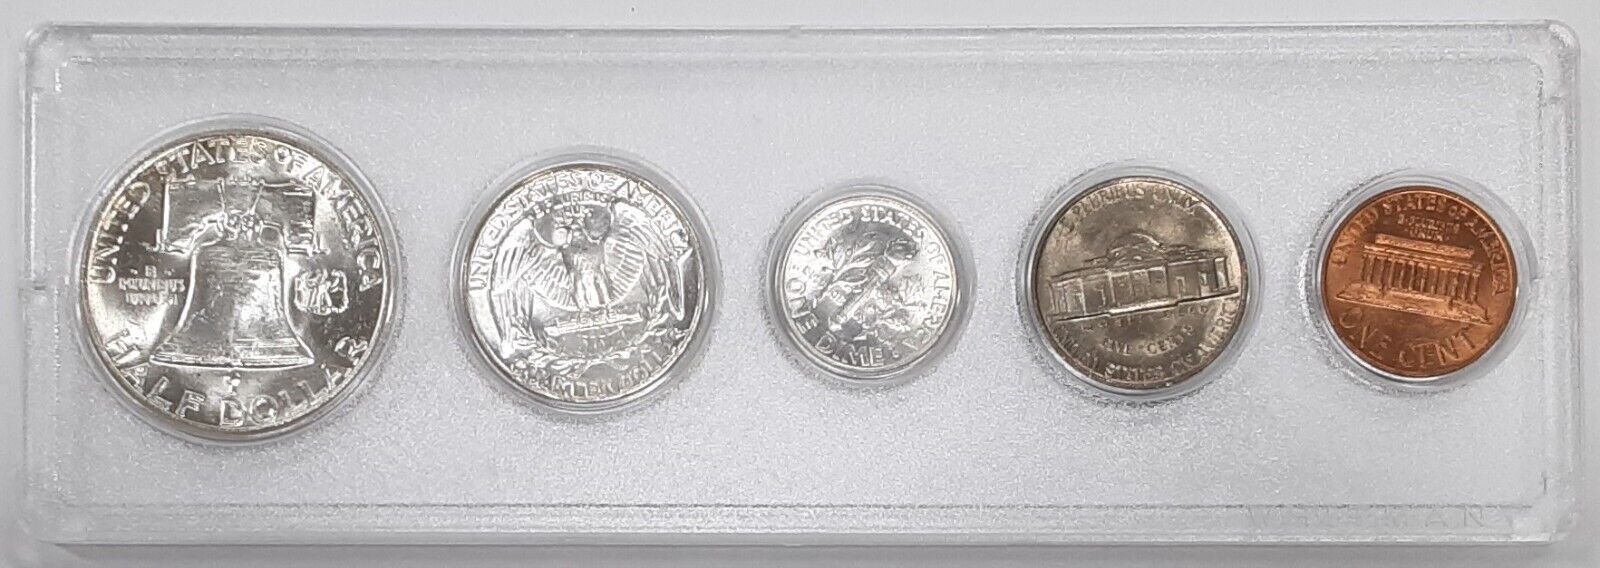 1960 US Uncirculated Year Set with Silver Half Quarter and Dime 5 Coins Total